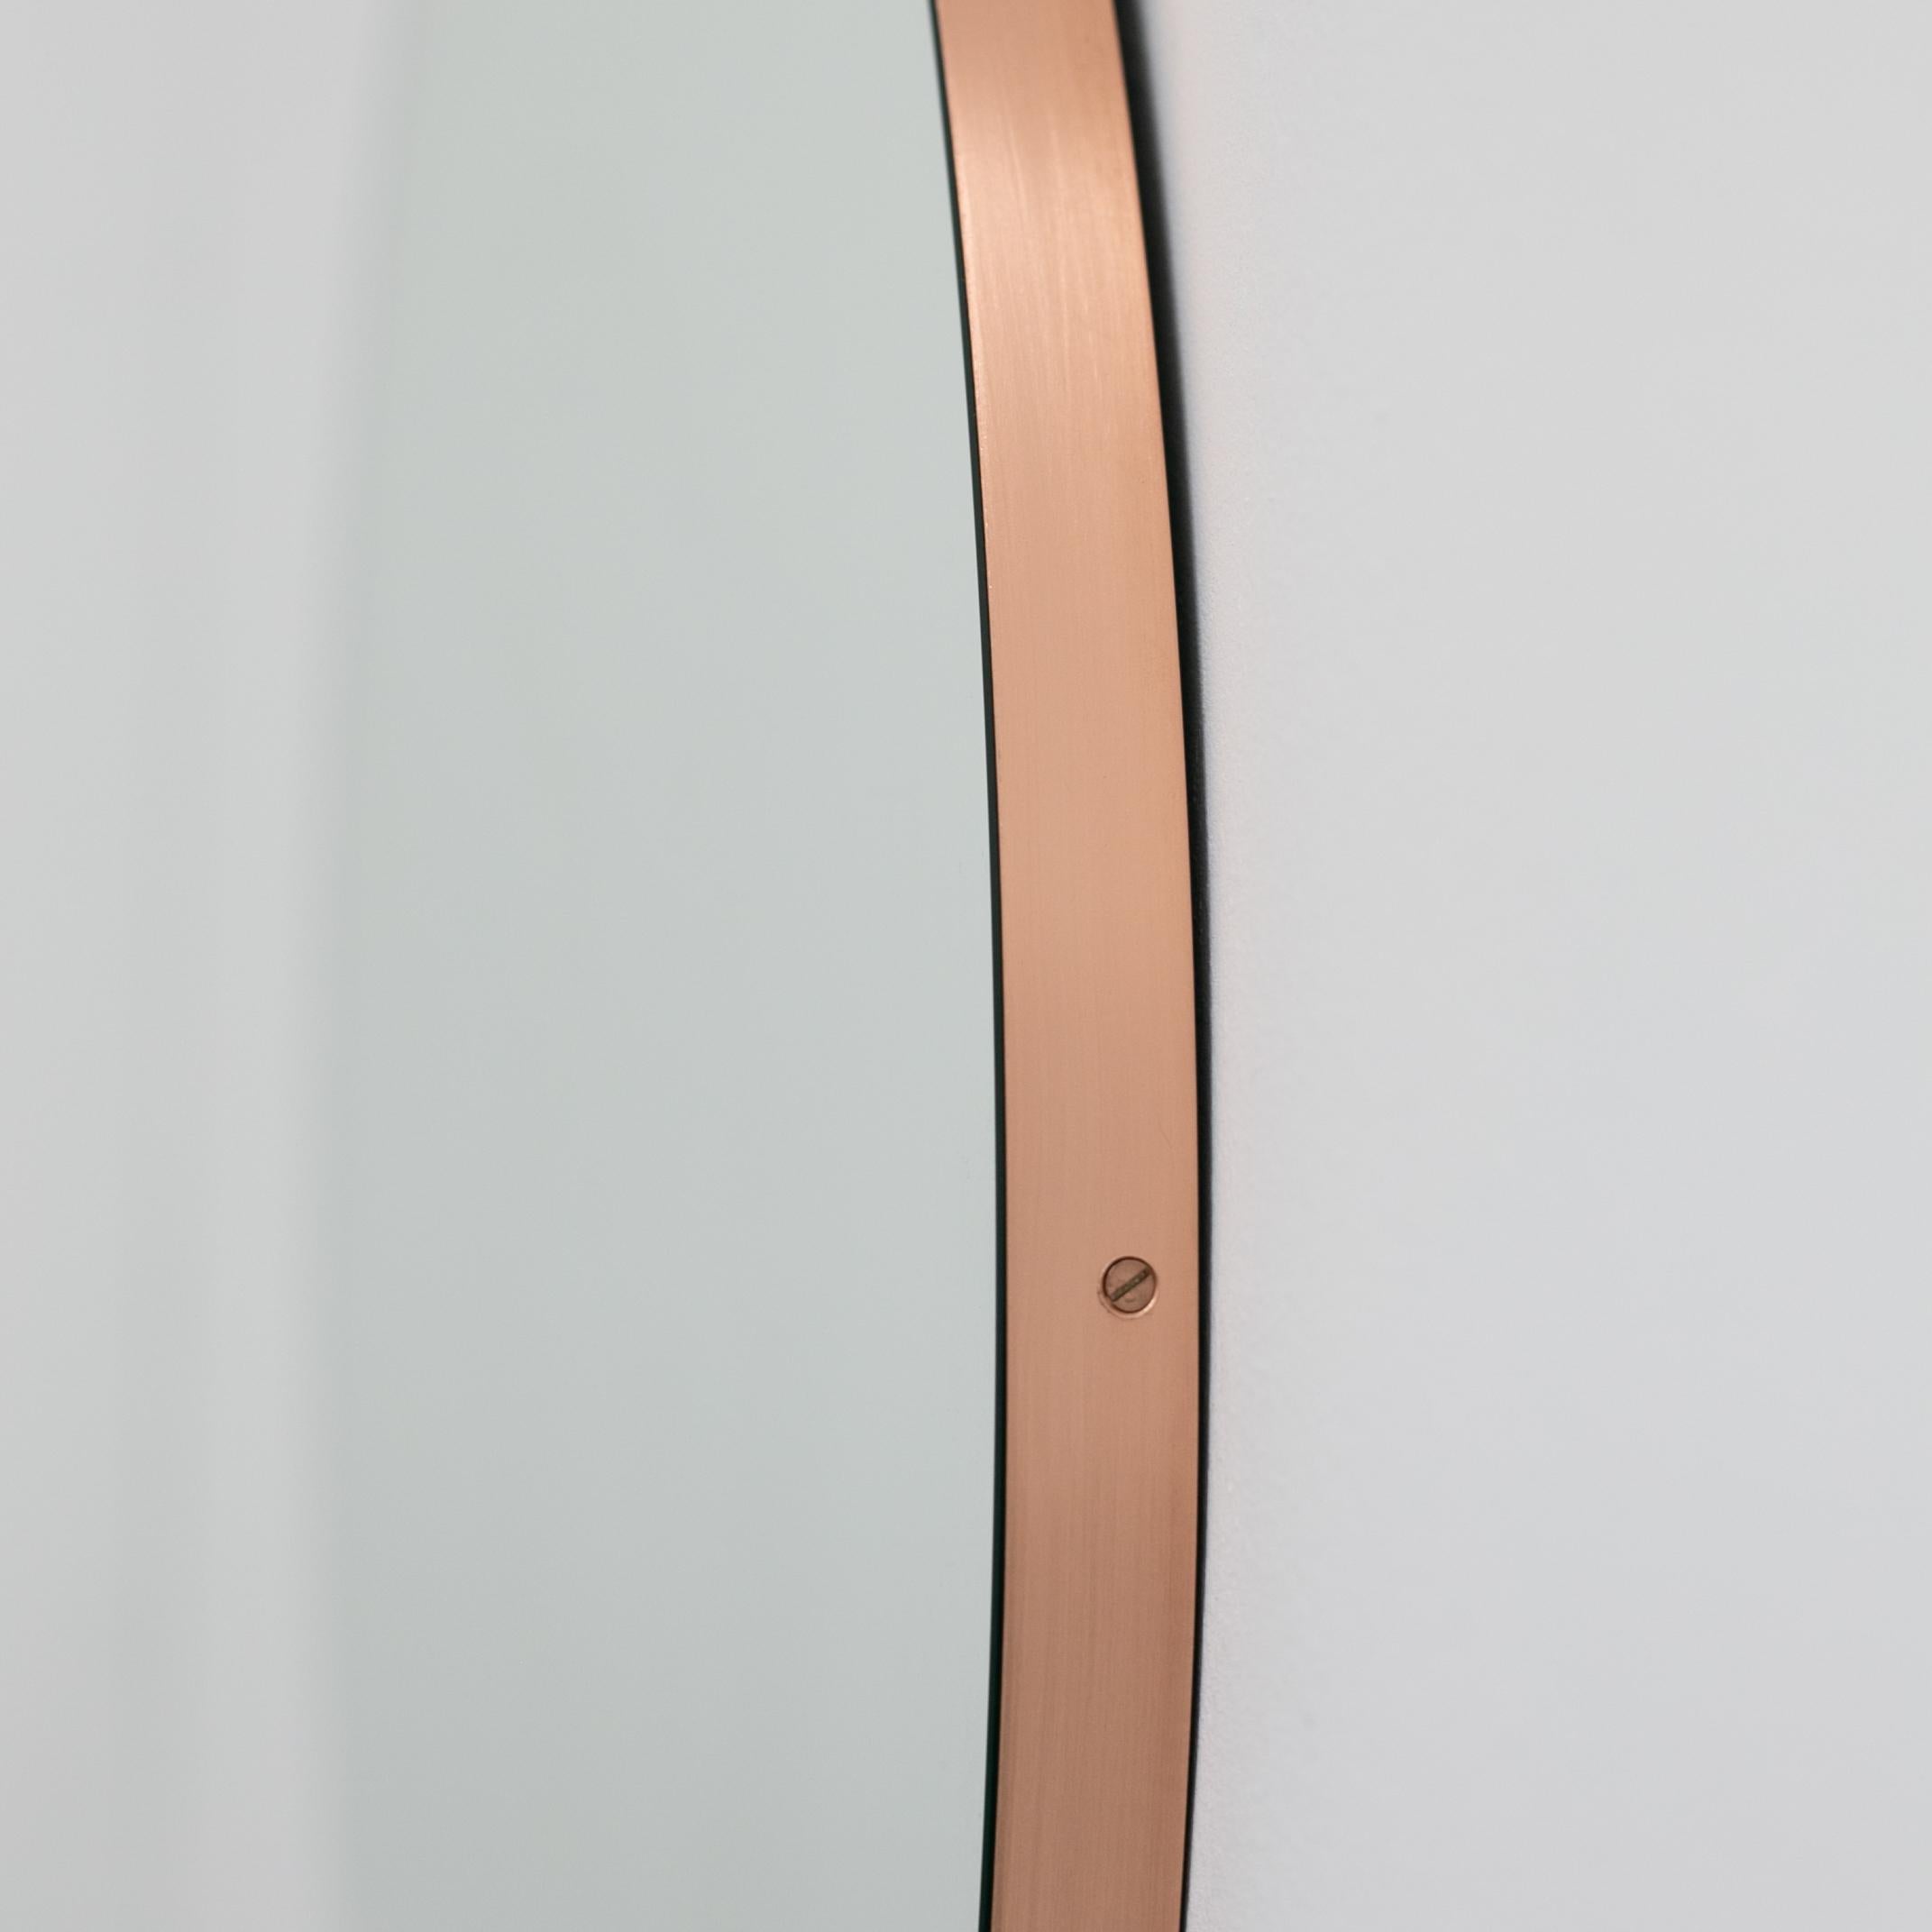 British Orbis Round Contemporary Mirror with Brushed Copper Frame, XL For Sale